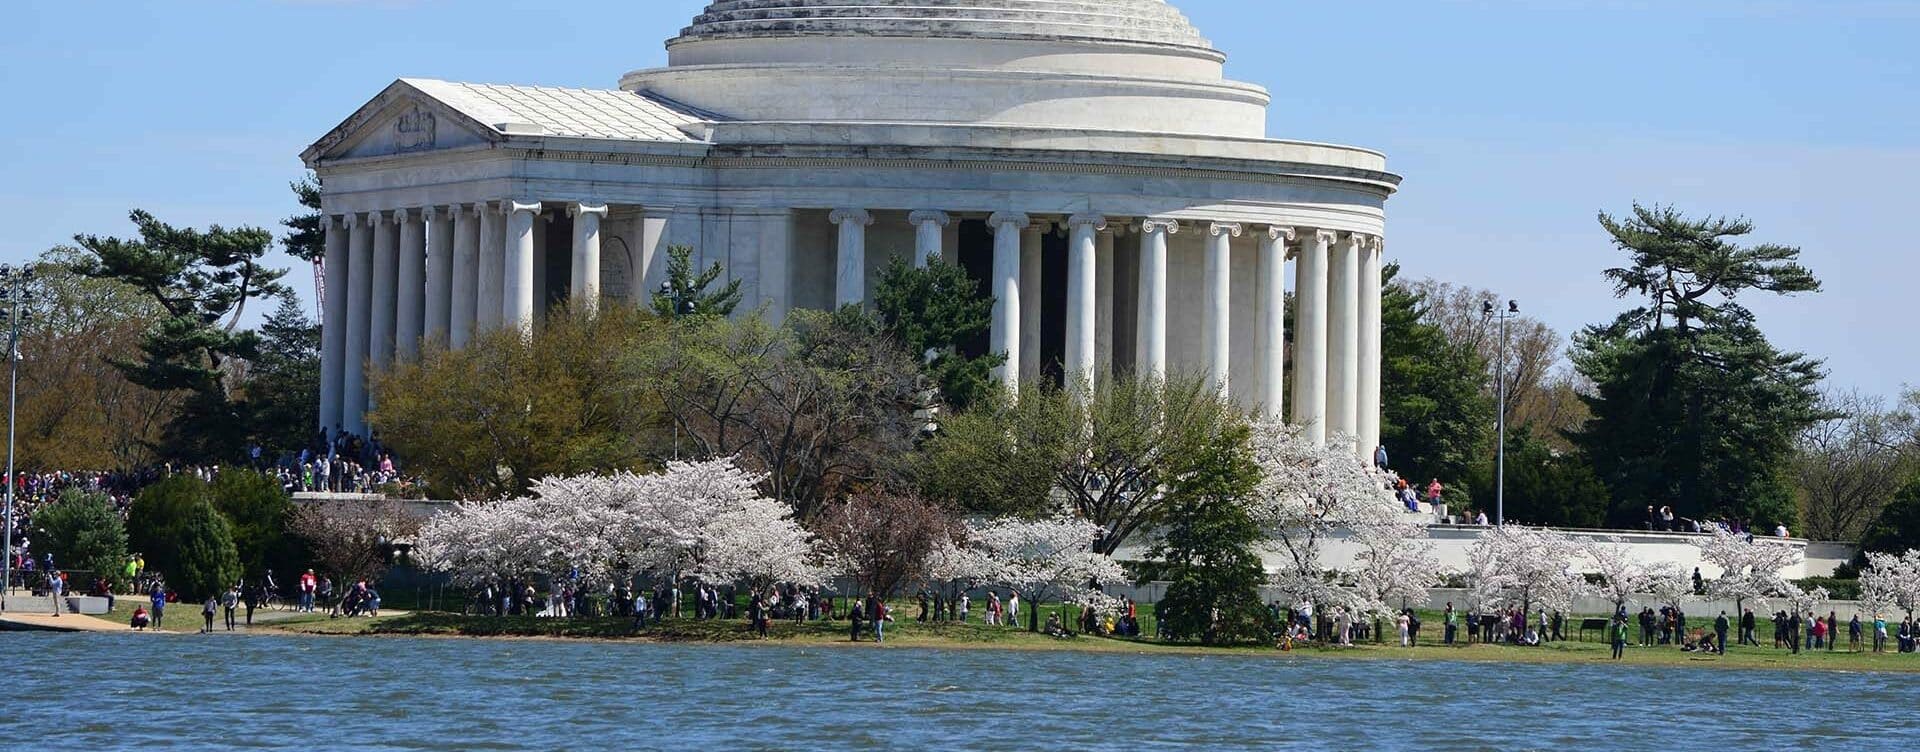 The image shows the Jefferson Memorial, a neoclassical building with a domed roof and tall columns, surrounded by lush trees and blooming cherry blossoms. The memorial is situated by the water, where even members of a Crisis Management Team join the crowd to enjoy the scenic view.